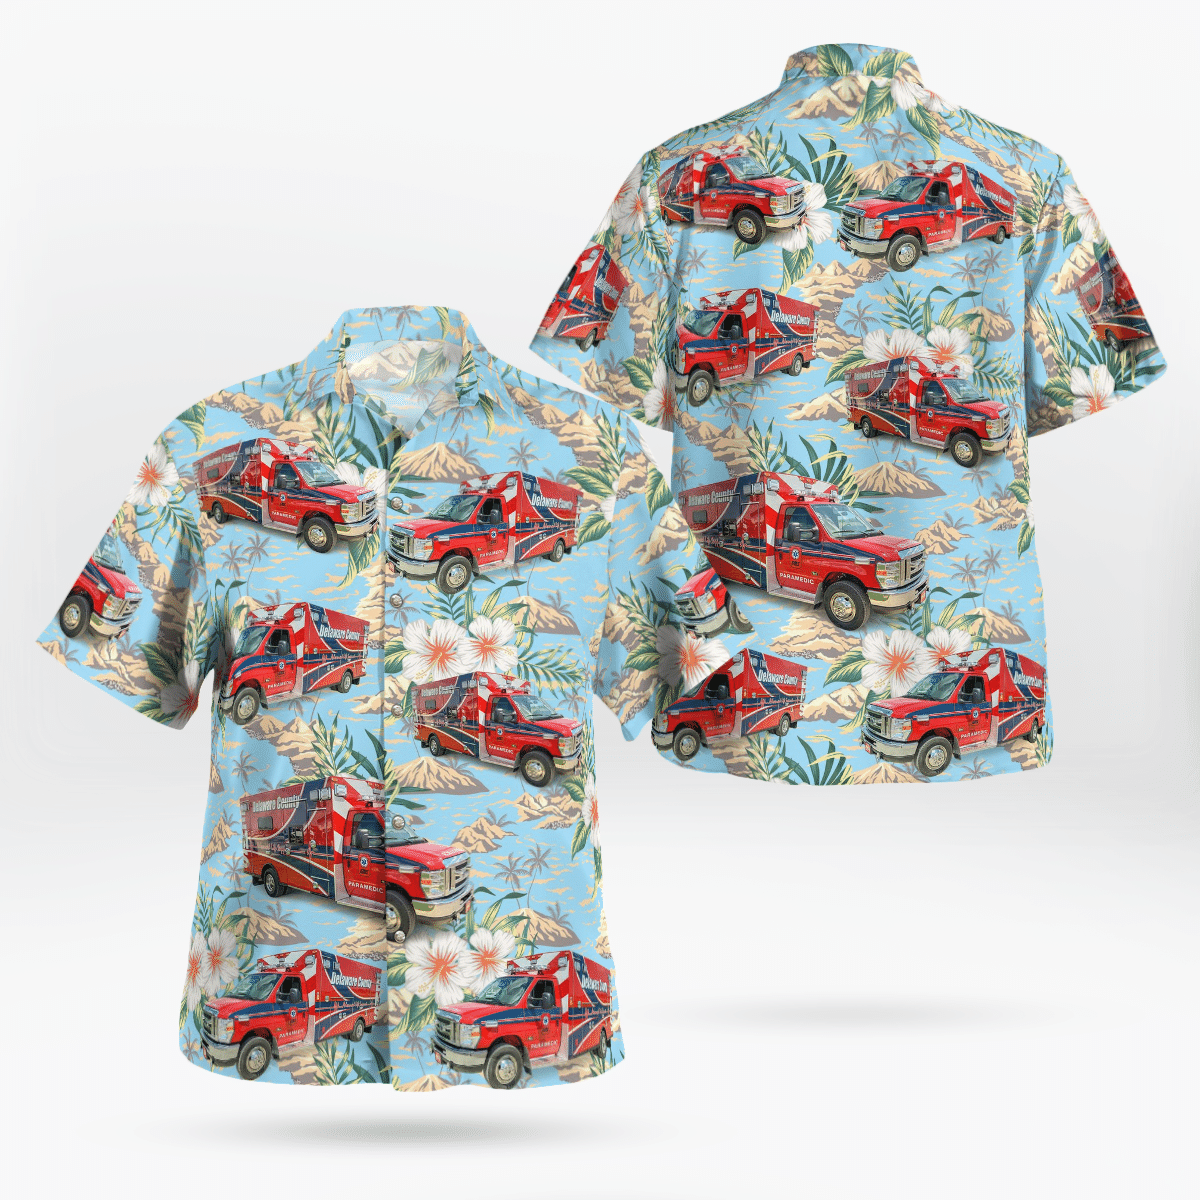 Top Hawaiian shirts are perfect for hot and humid days 184